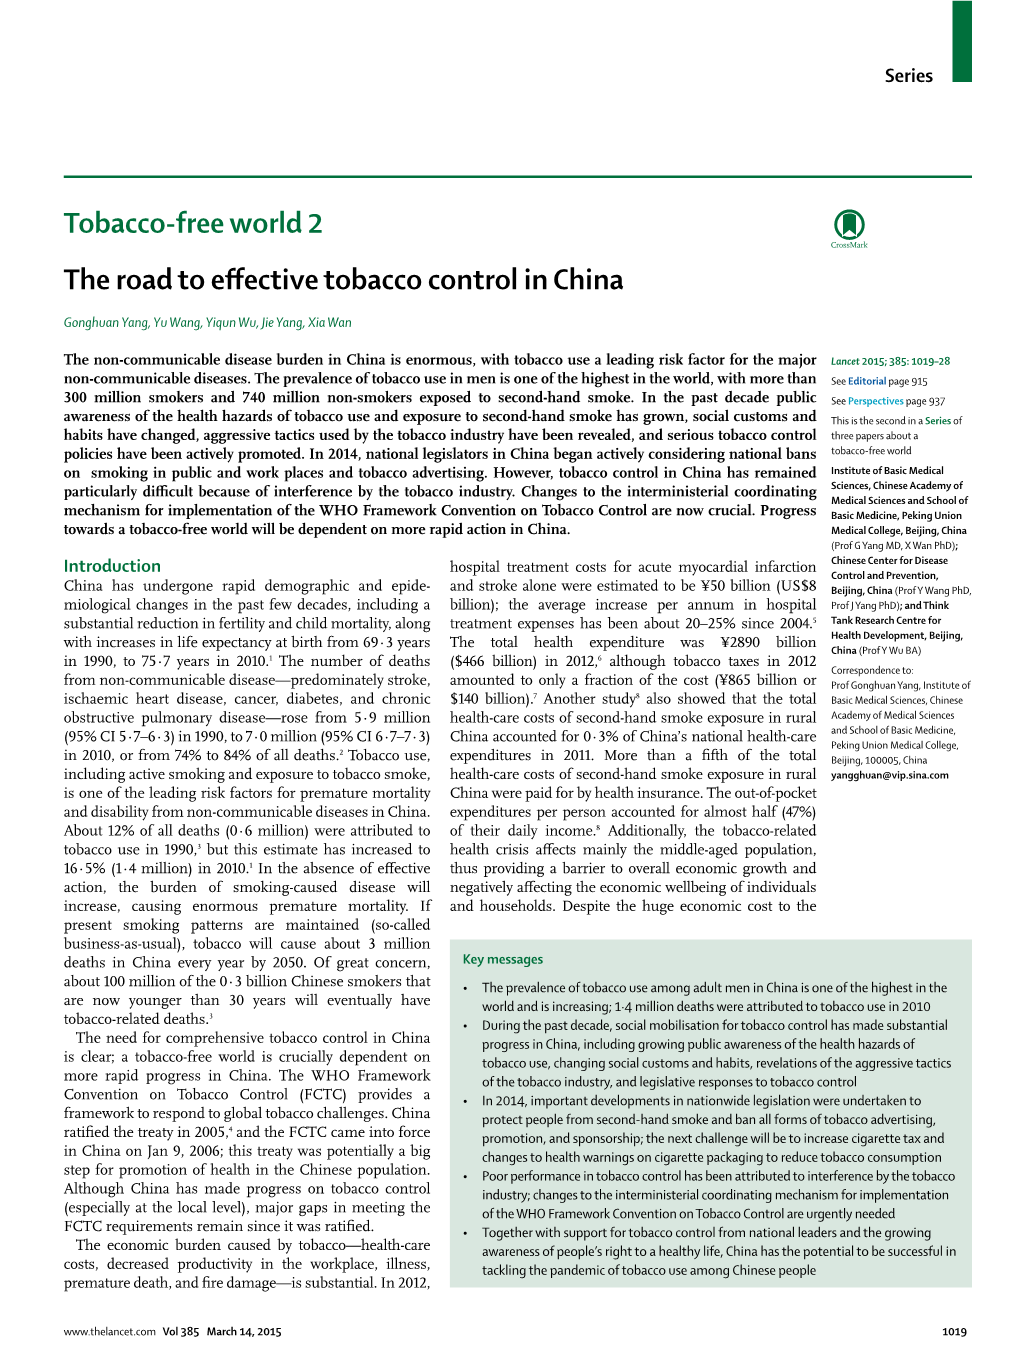 The Road to Effective Tobacco Control in China